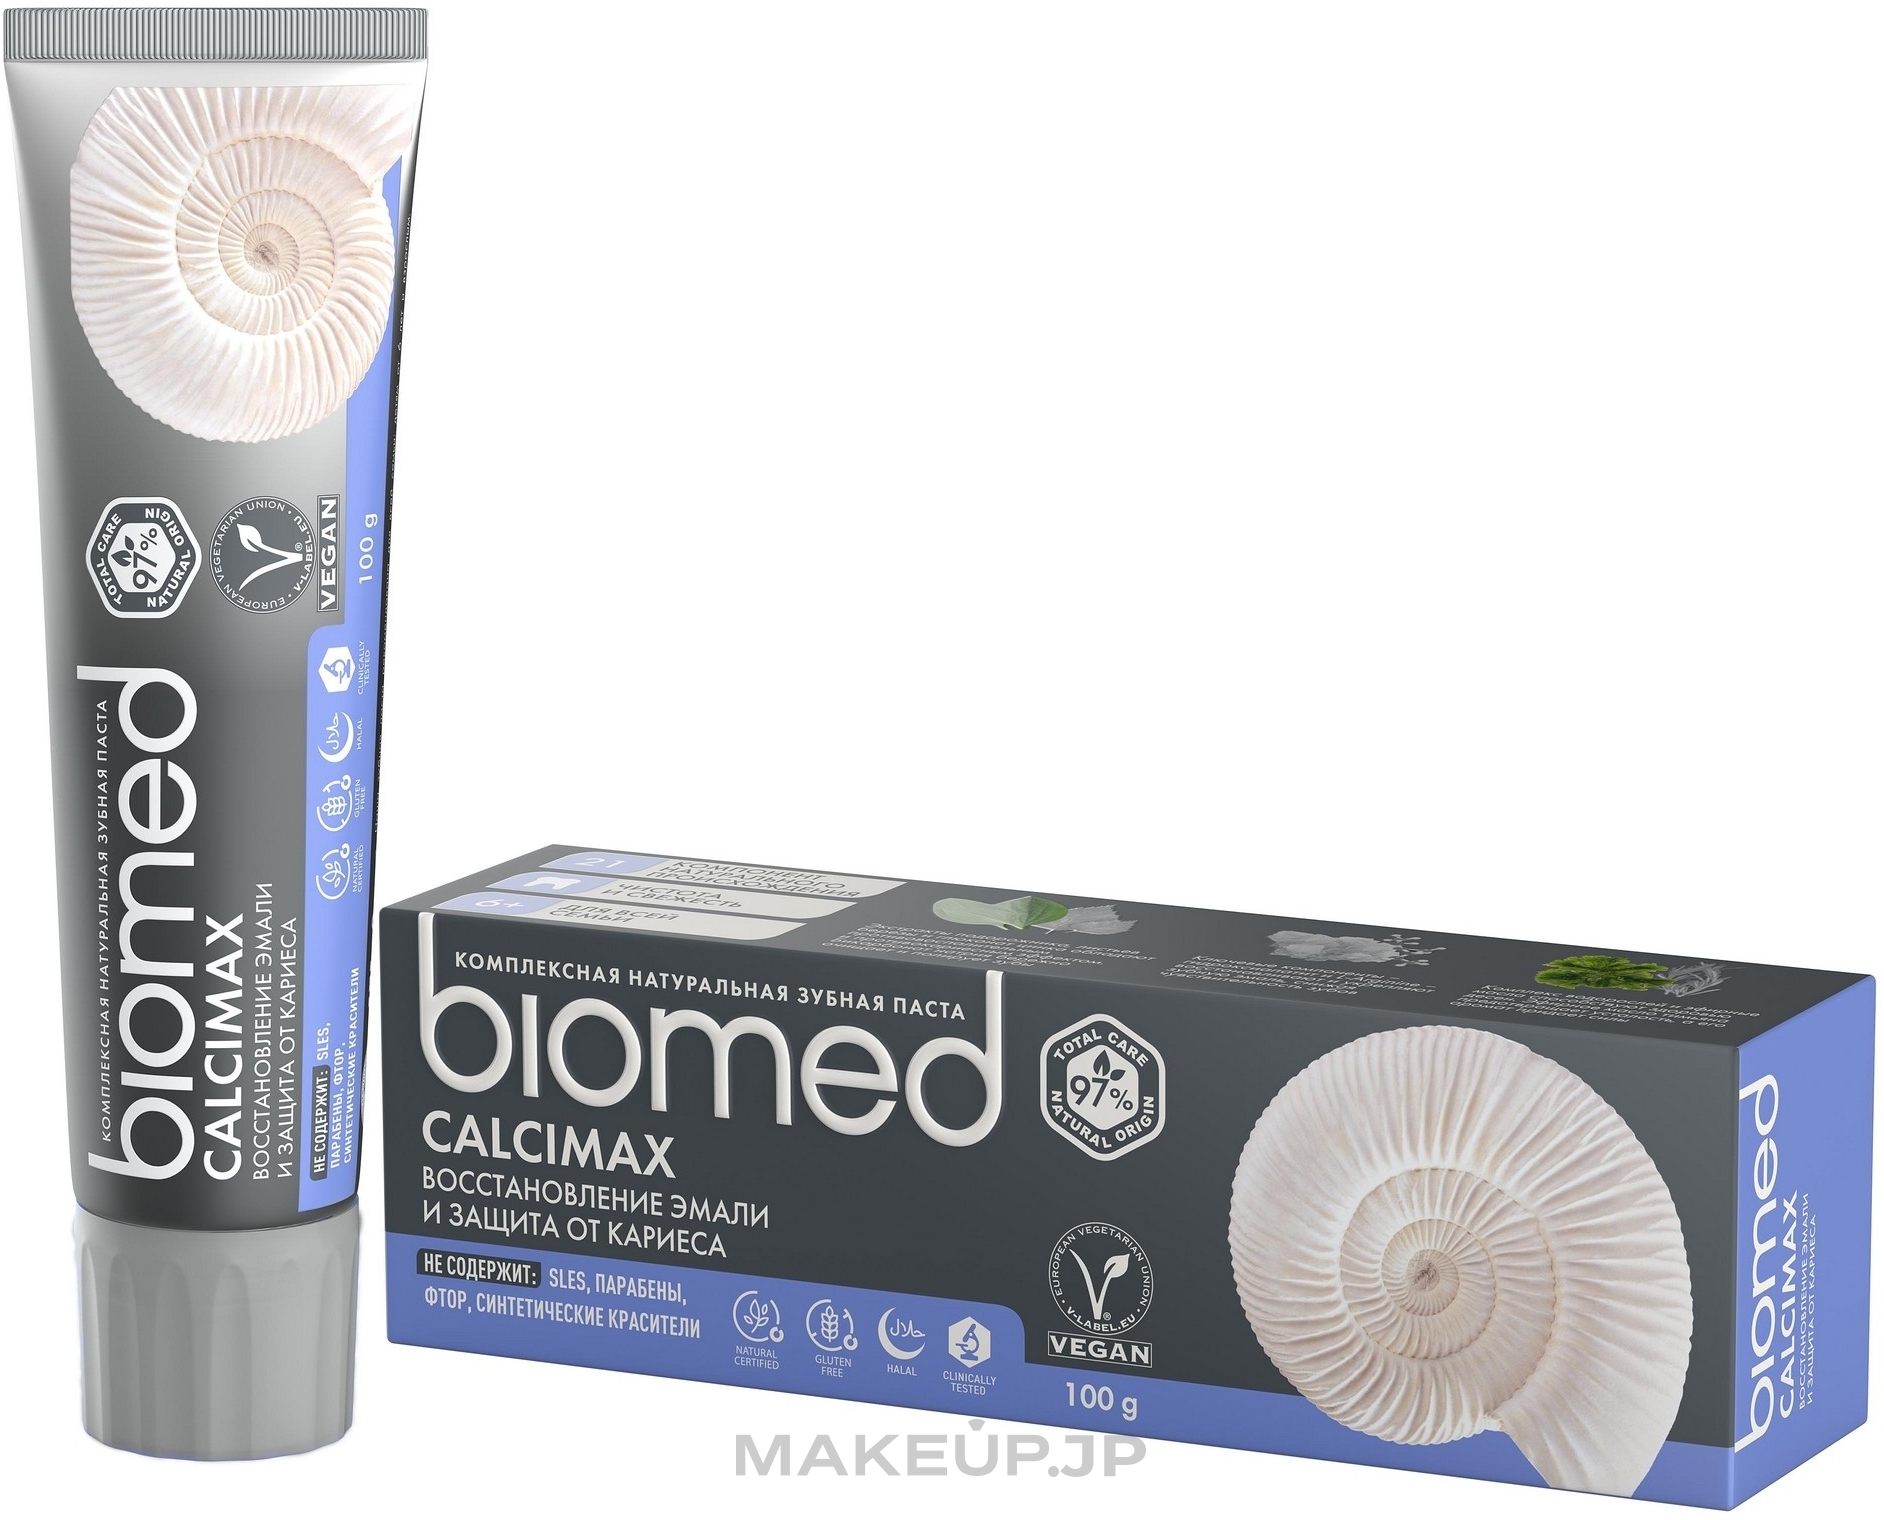 Strengthening Toothpaste "Calcimax" - Biomed Calcimax — photo 100 g